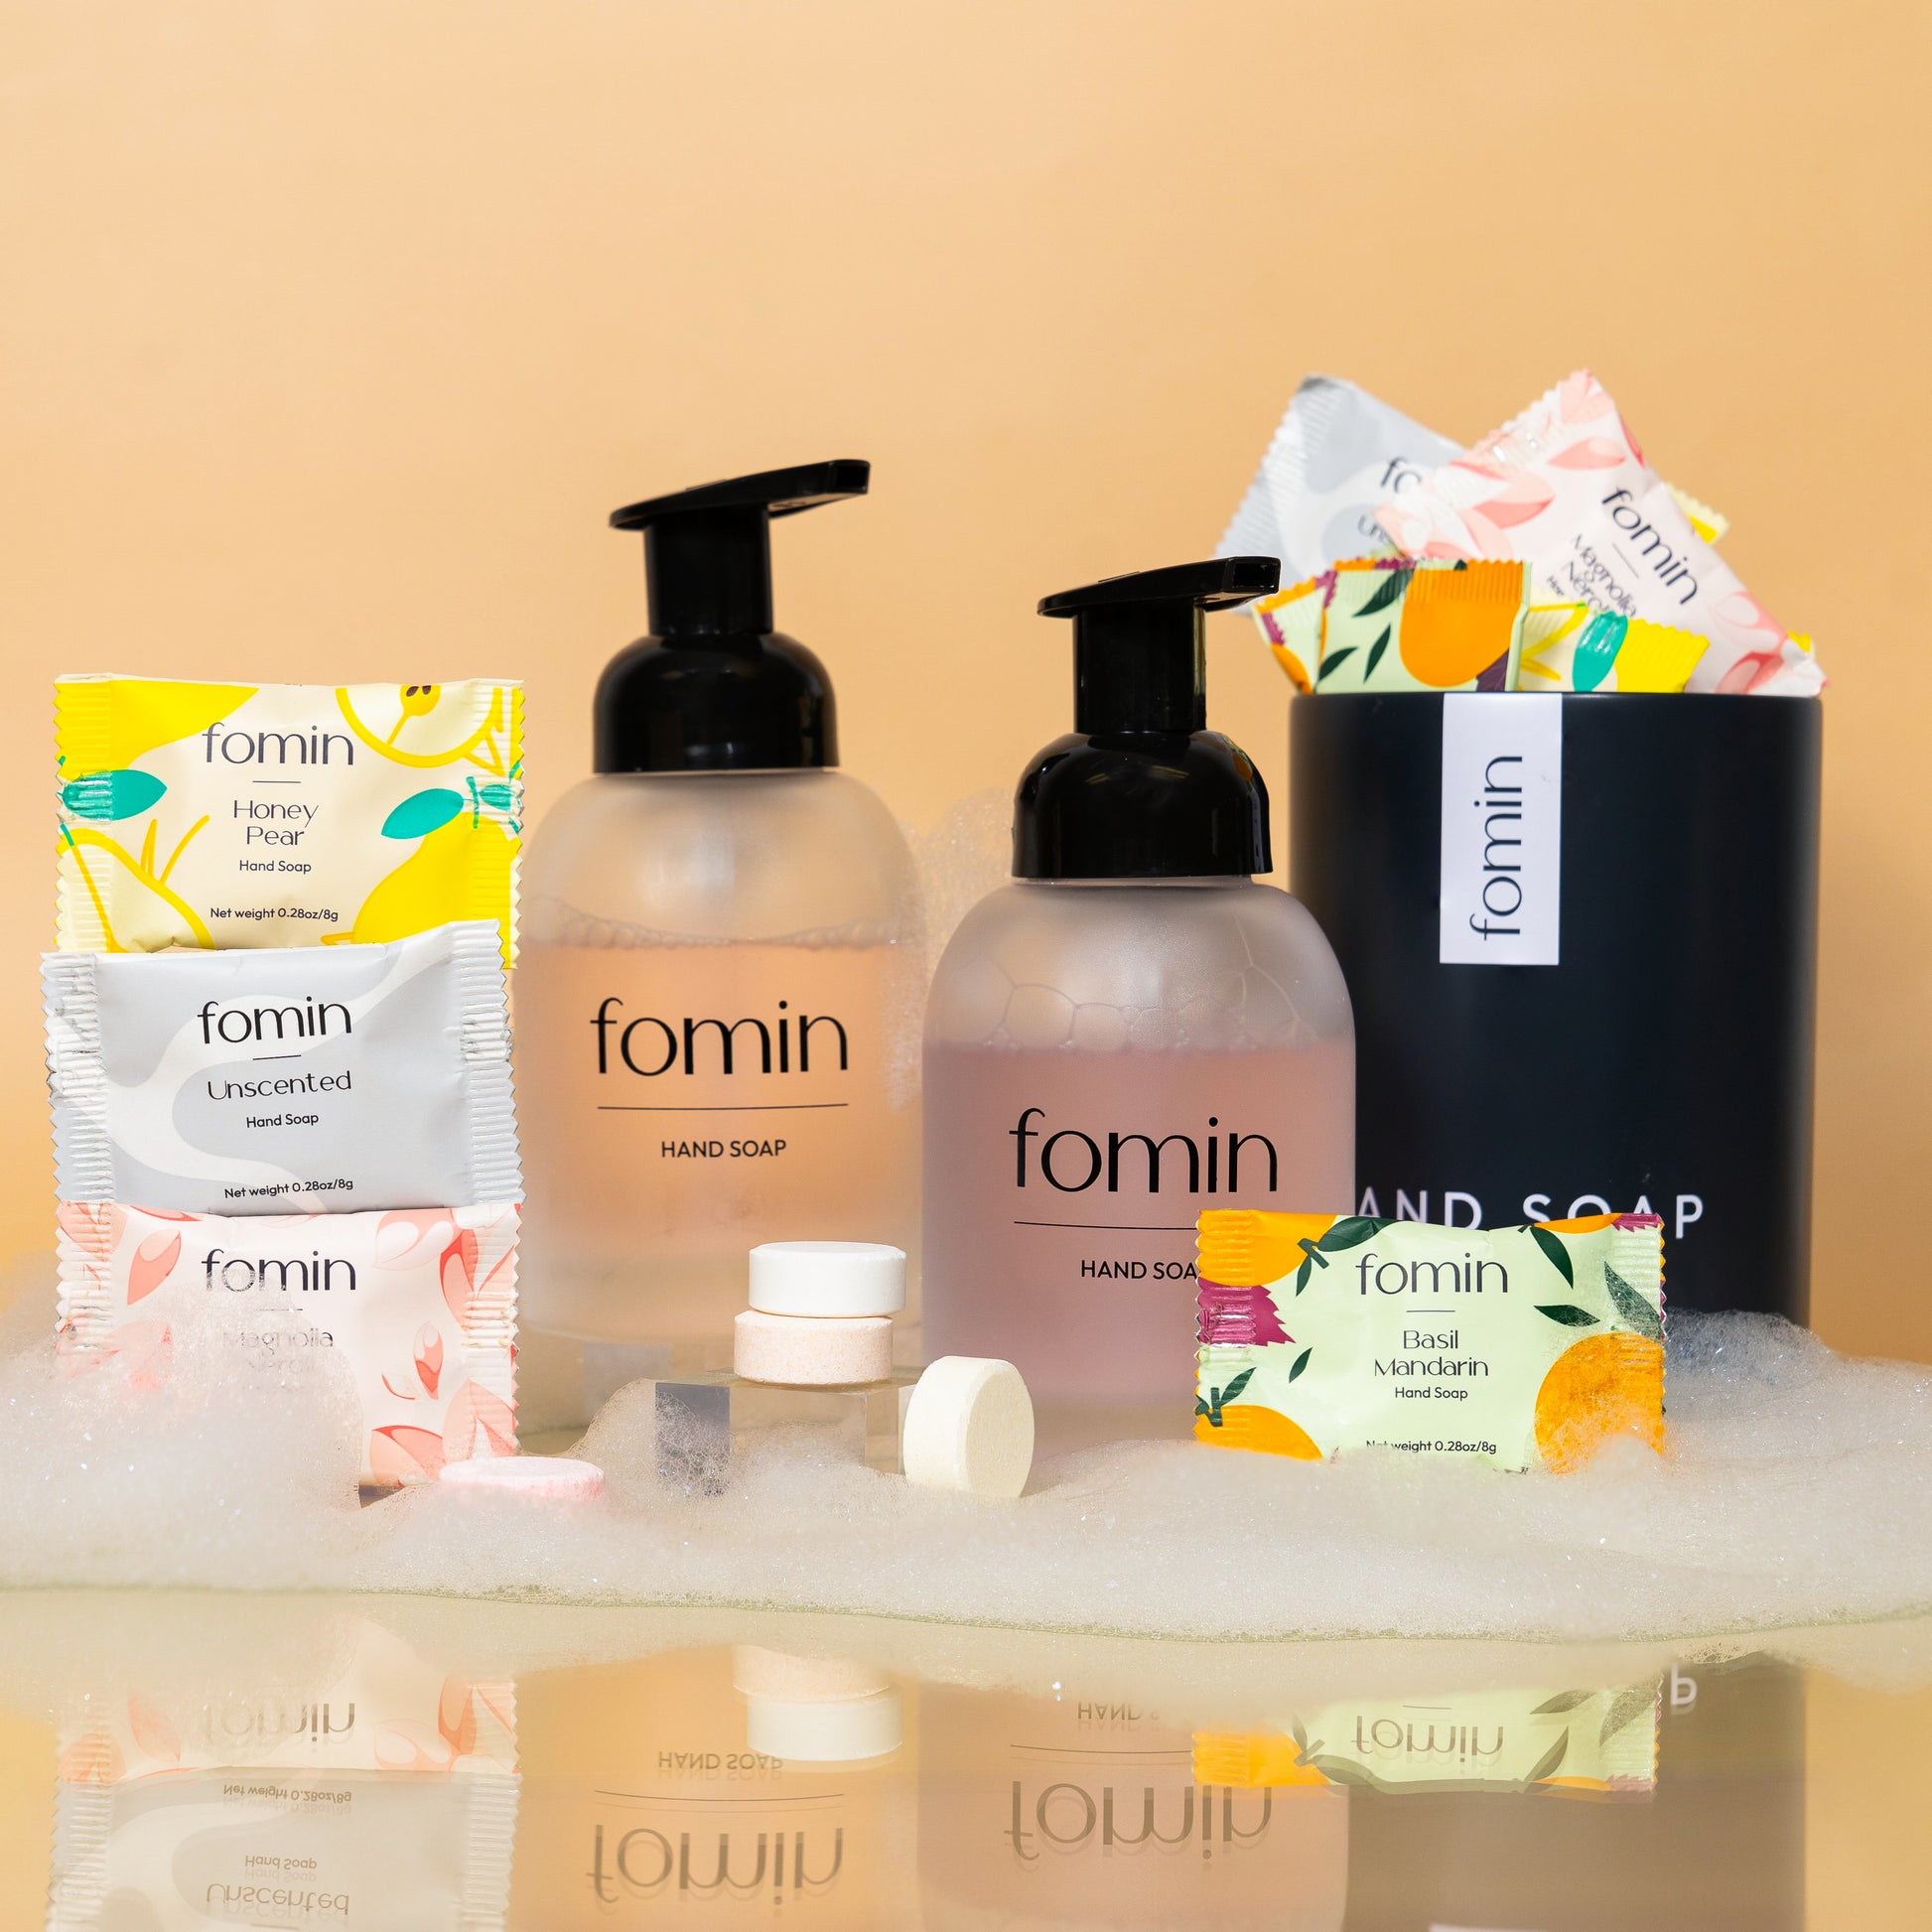 Fomin soap welcome kit